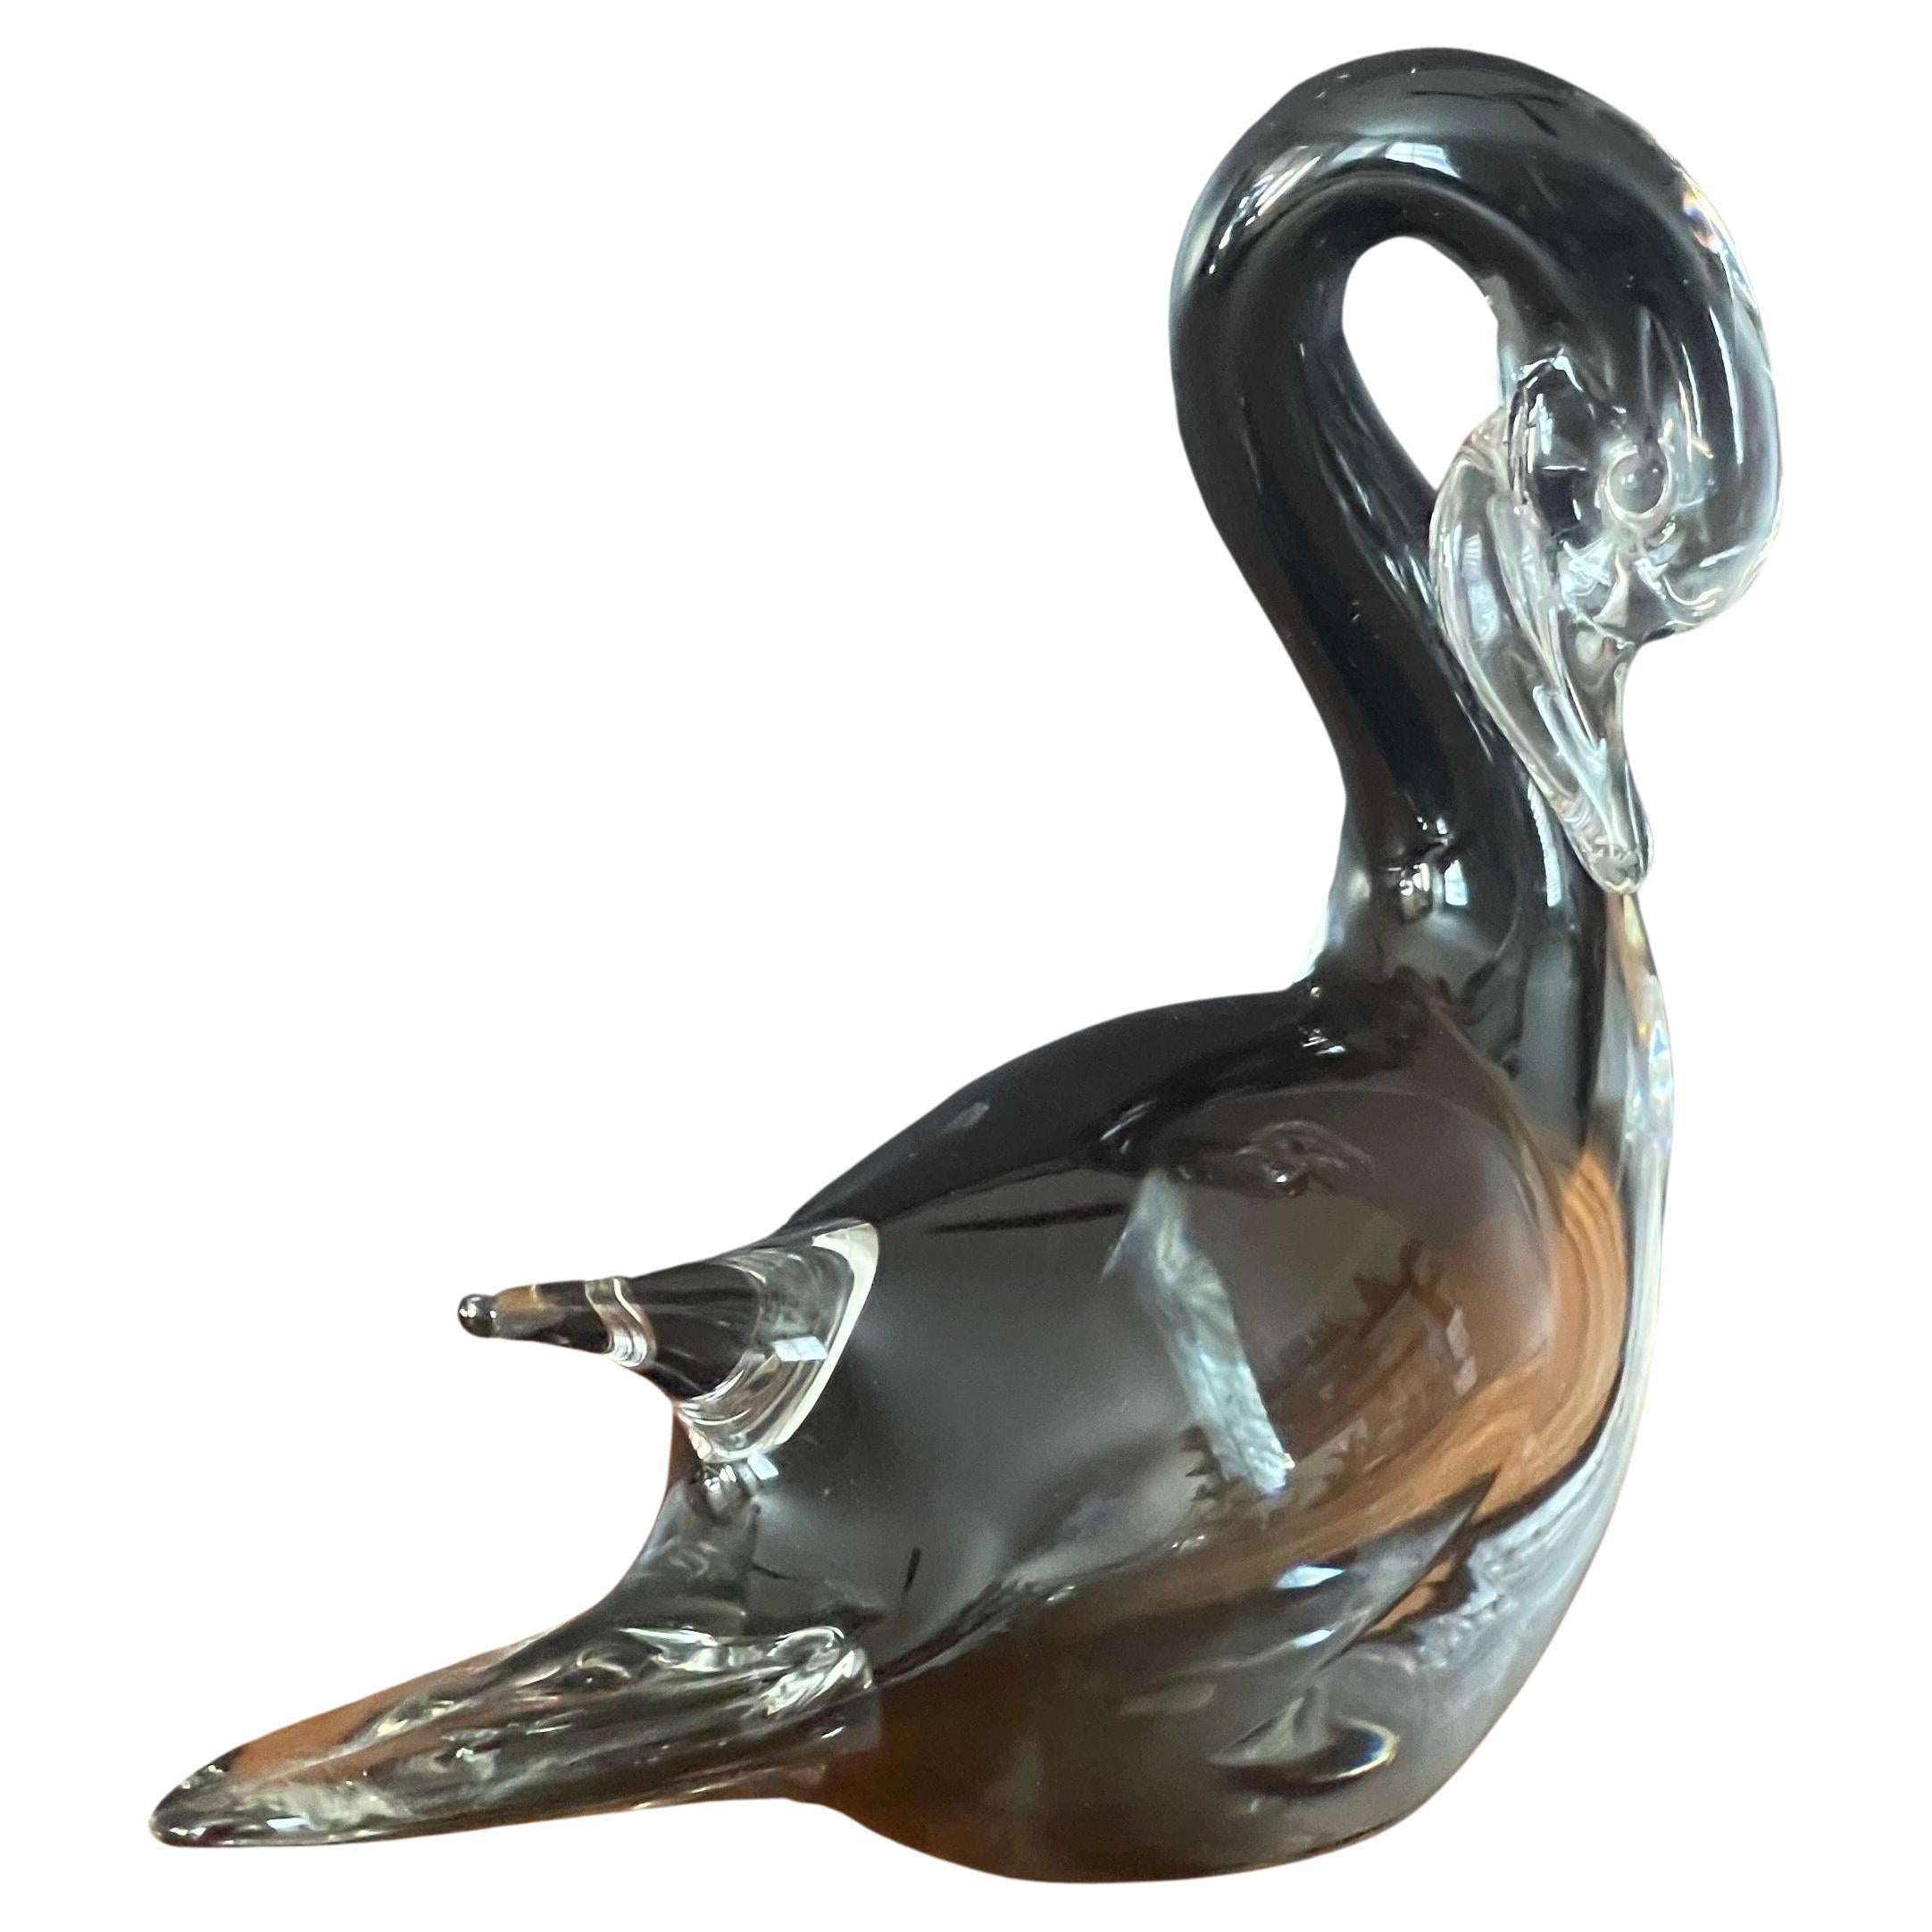 Petite Swan Sommerso Art Glass Sculpture by Murano Glass